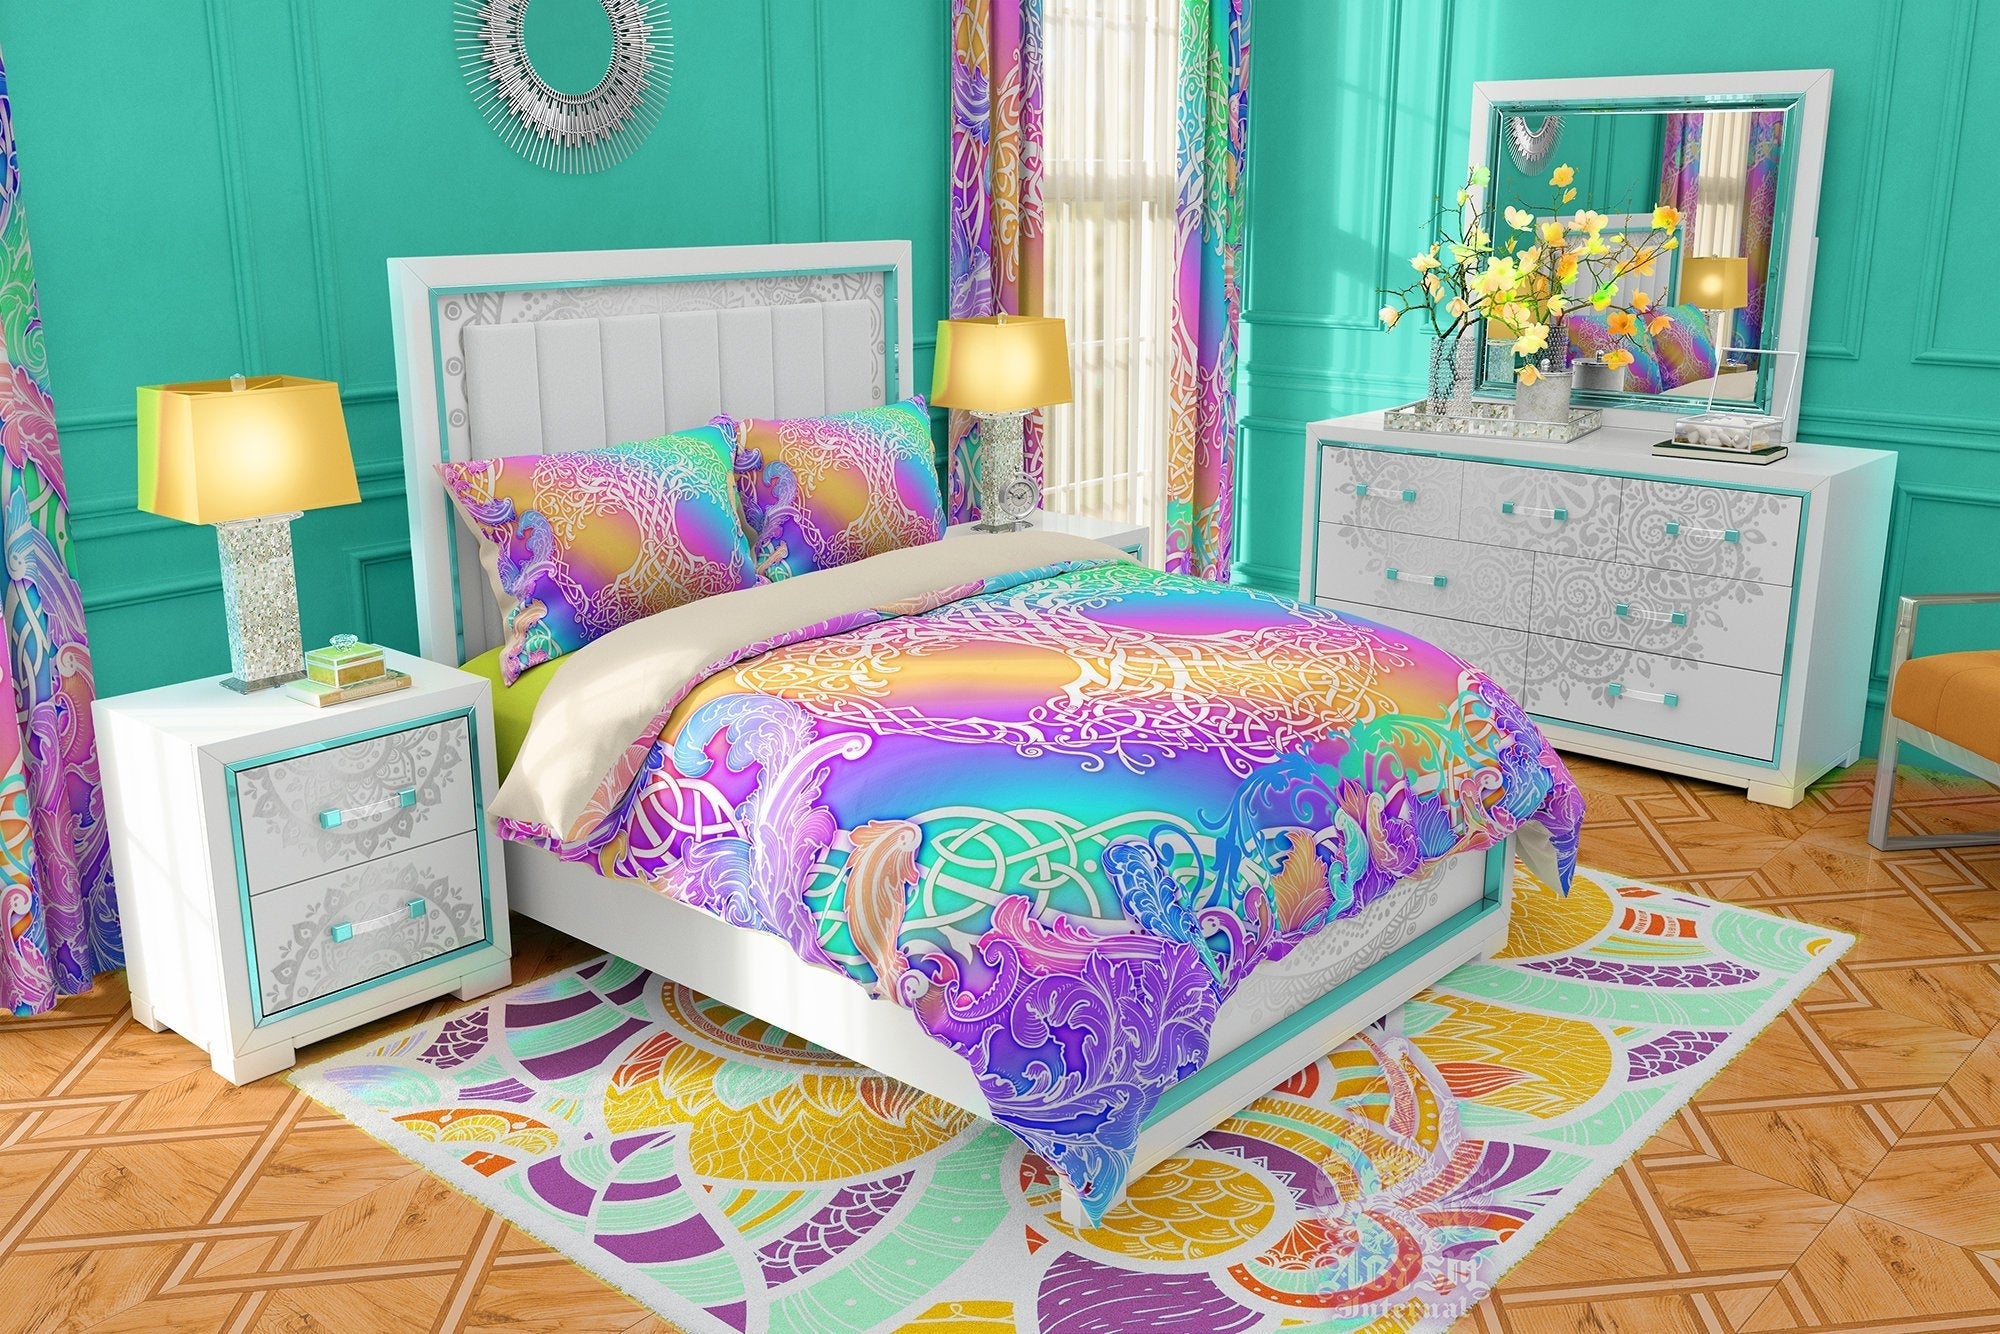 Tree of Life Bedding Set, Comforter and Duvet, Aesthetic Bed Cover, Kawaii Gamer Bedroom Decor, Witchy Pastel Room, King, Queen and Twin Size - Celtic, Psychedelic - Abysm Internal